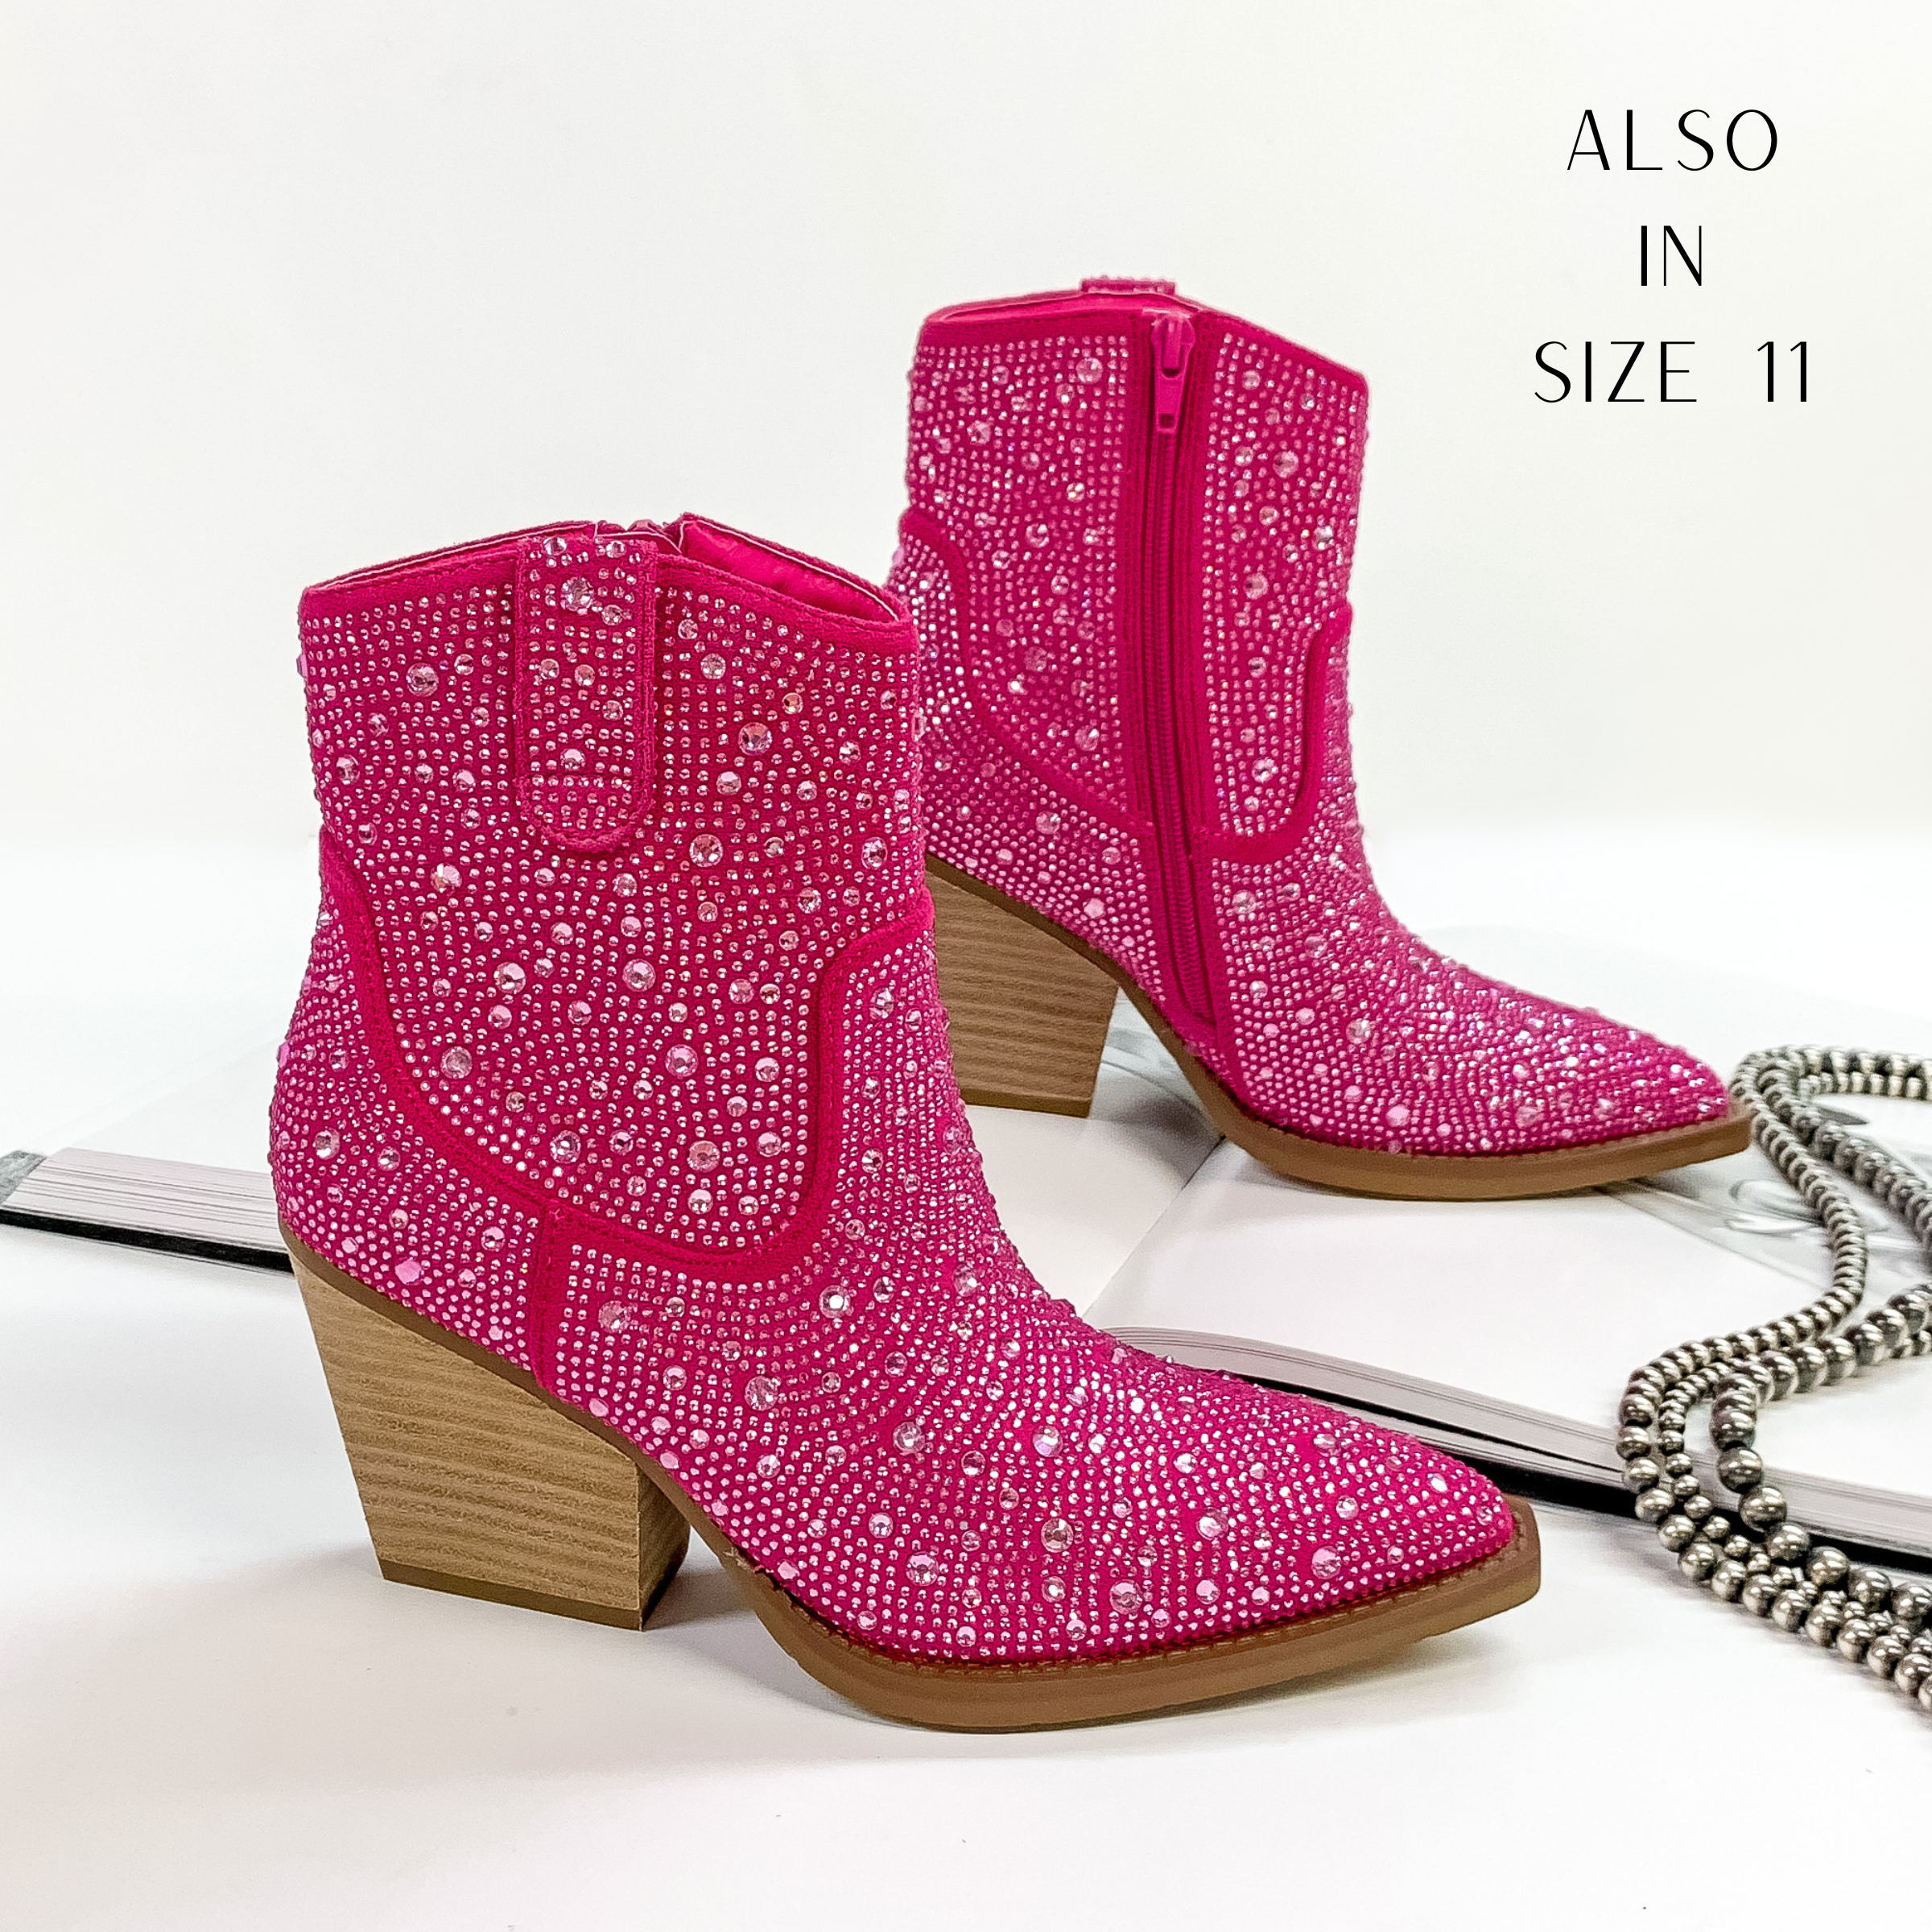 Pictured are black cowboy booties with pink crystals covering the entire boot. These boots also include a tan heel and sole. These boots are pictured on front on a white background with one boot resting on an open book.